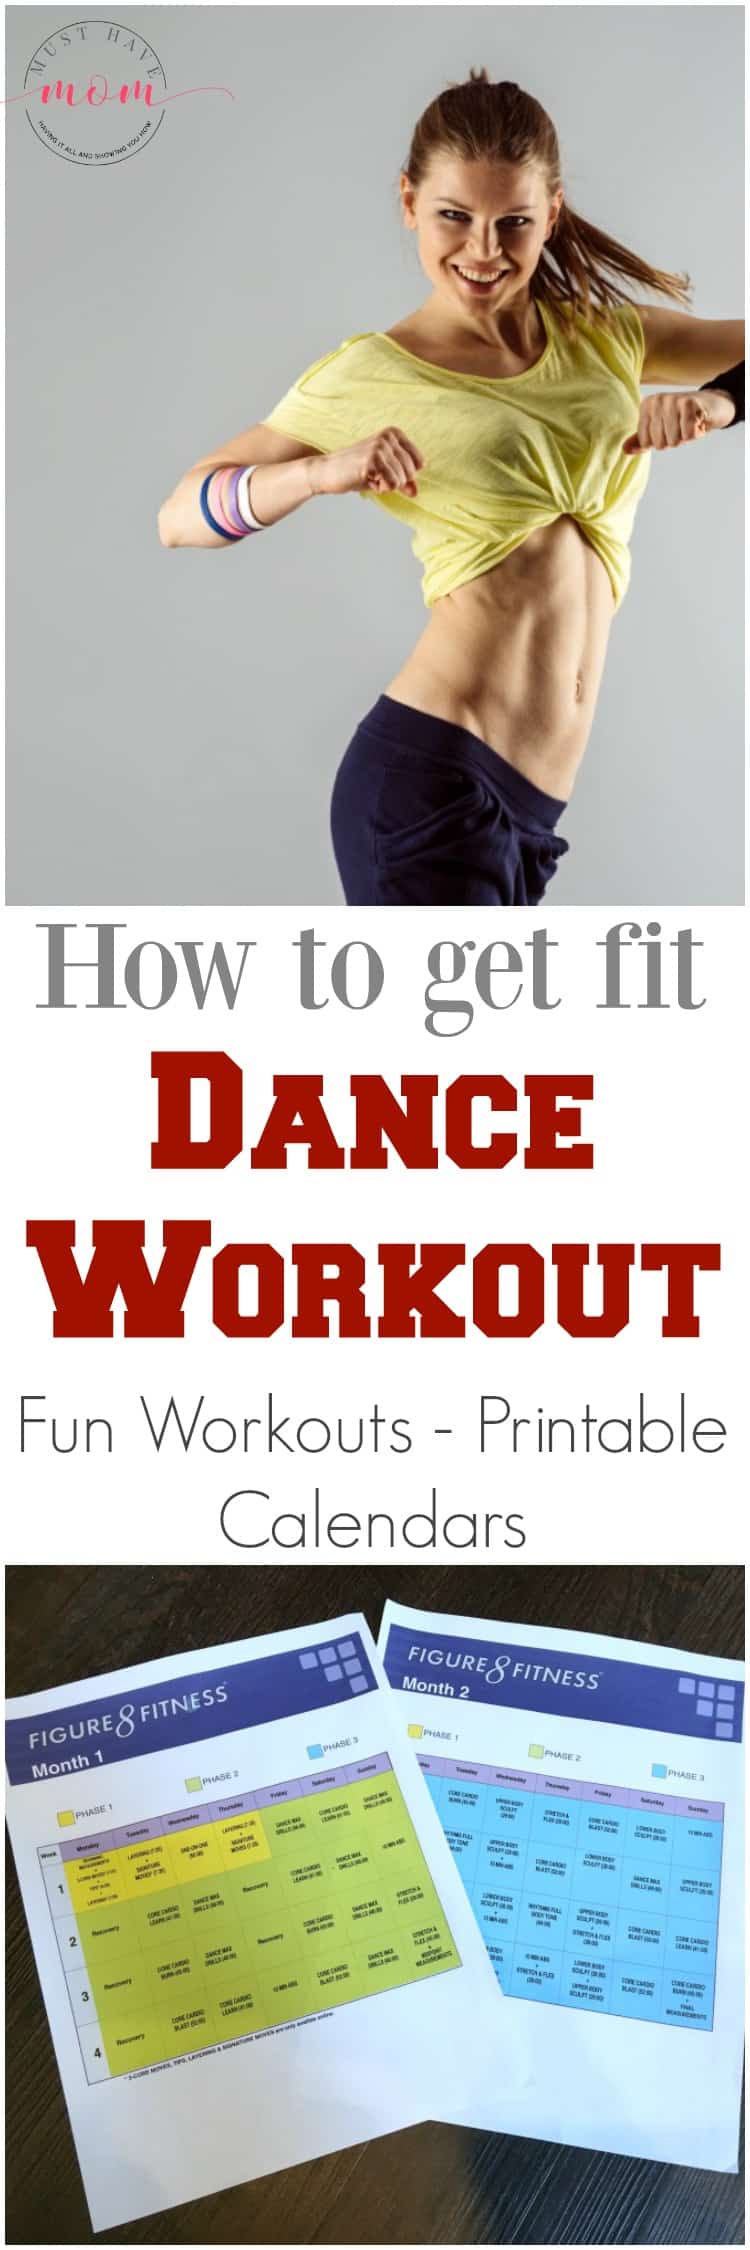 Fun Dance Workout that actually works! Printable calendars, eating plan, and you don't have to buy equipment or have a large space to workout in!